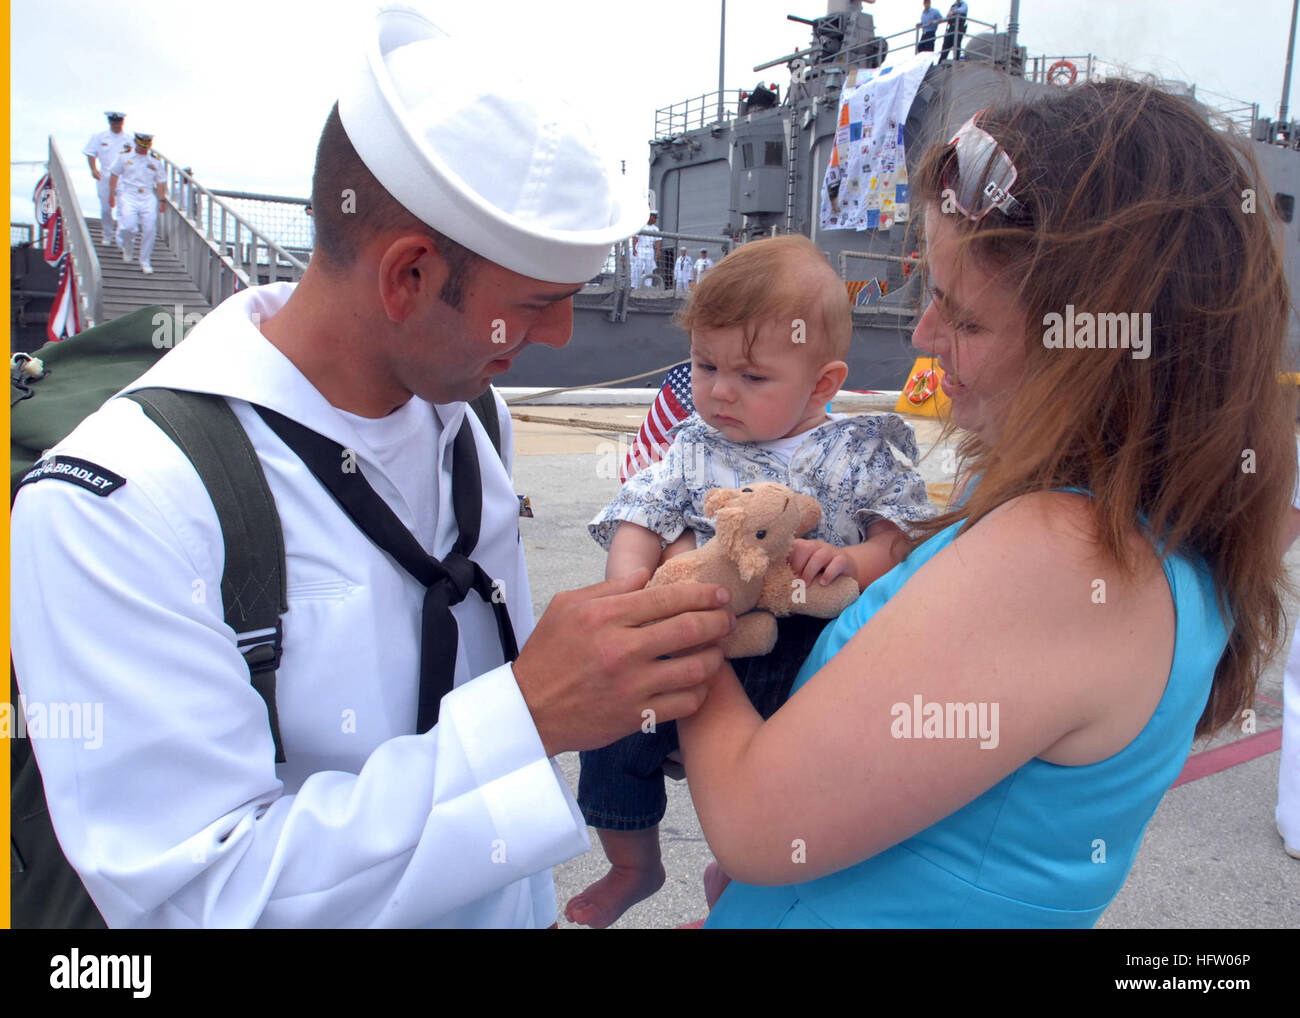 090523-N-0486G-012 JACKSONVILLE, Fla. (May 23, 2009) Boatswains Mate 3rd class Jeremy Allan hands a teddy bear to his 5-month old son as they meet for the first time. Allan returned from a six-month deployment aboard the guided-missile frigate USS Robert G. Bradley (FFG 49) during the ship’s return to Mayport Naval Station after a six-month deployment to the U.S. 6th Fleet area of responsibility. (U.S. Navy photo by Mass Communication Specialist 2nd Class Daniel Gay/Released) US Navy 090523-N-0486G-012 Boatswains Mate 3rd class Jeremy Allan hands a teddy bear to his 5-month old son as they mee Stock Photo